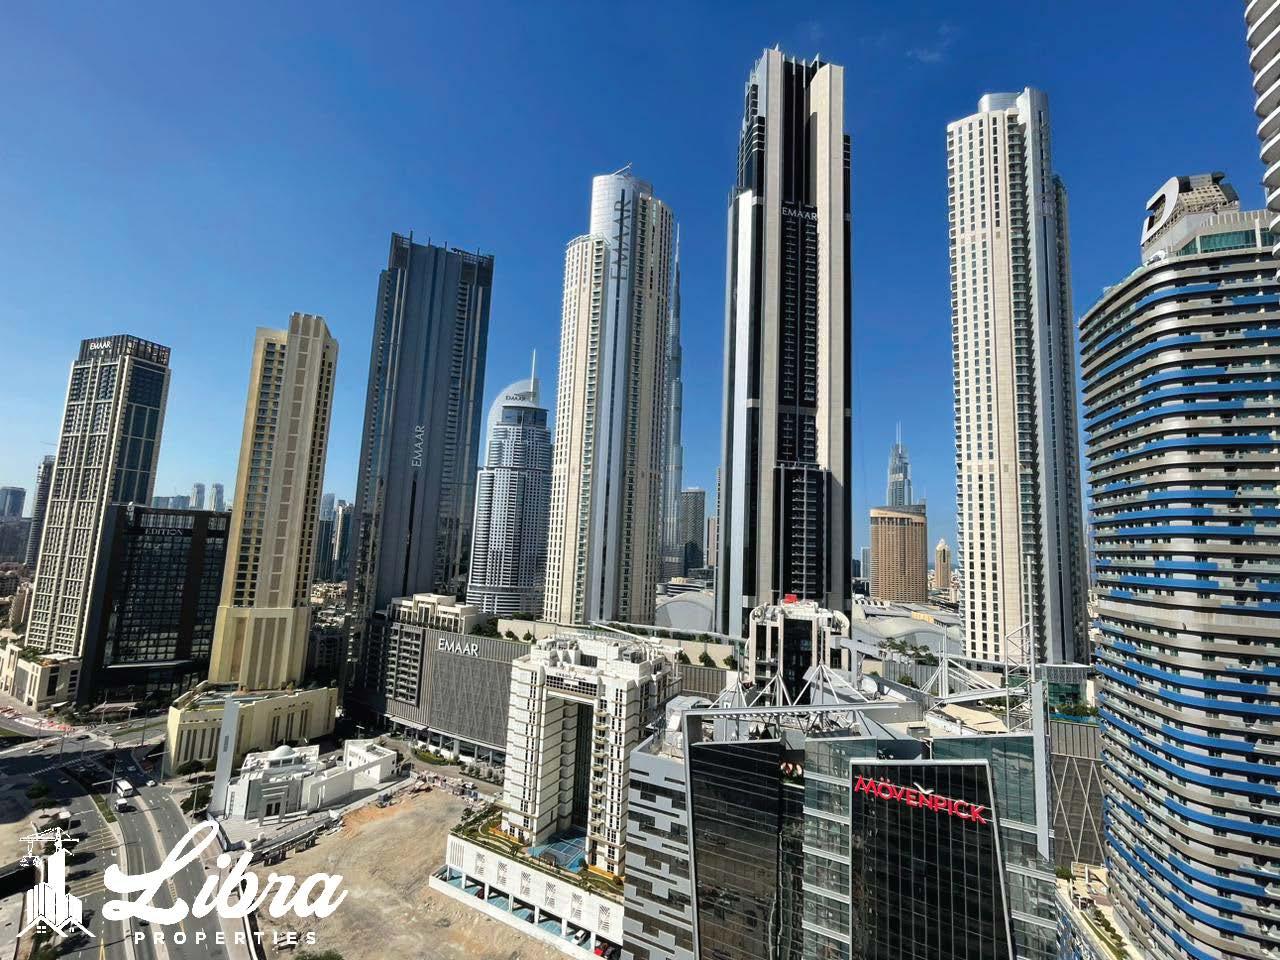 2 bed, 3 bath Apartment for sale in Upper Crest, Downtown Dubai, Dubai for price AED 1850000 